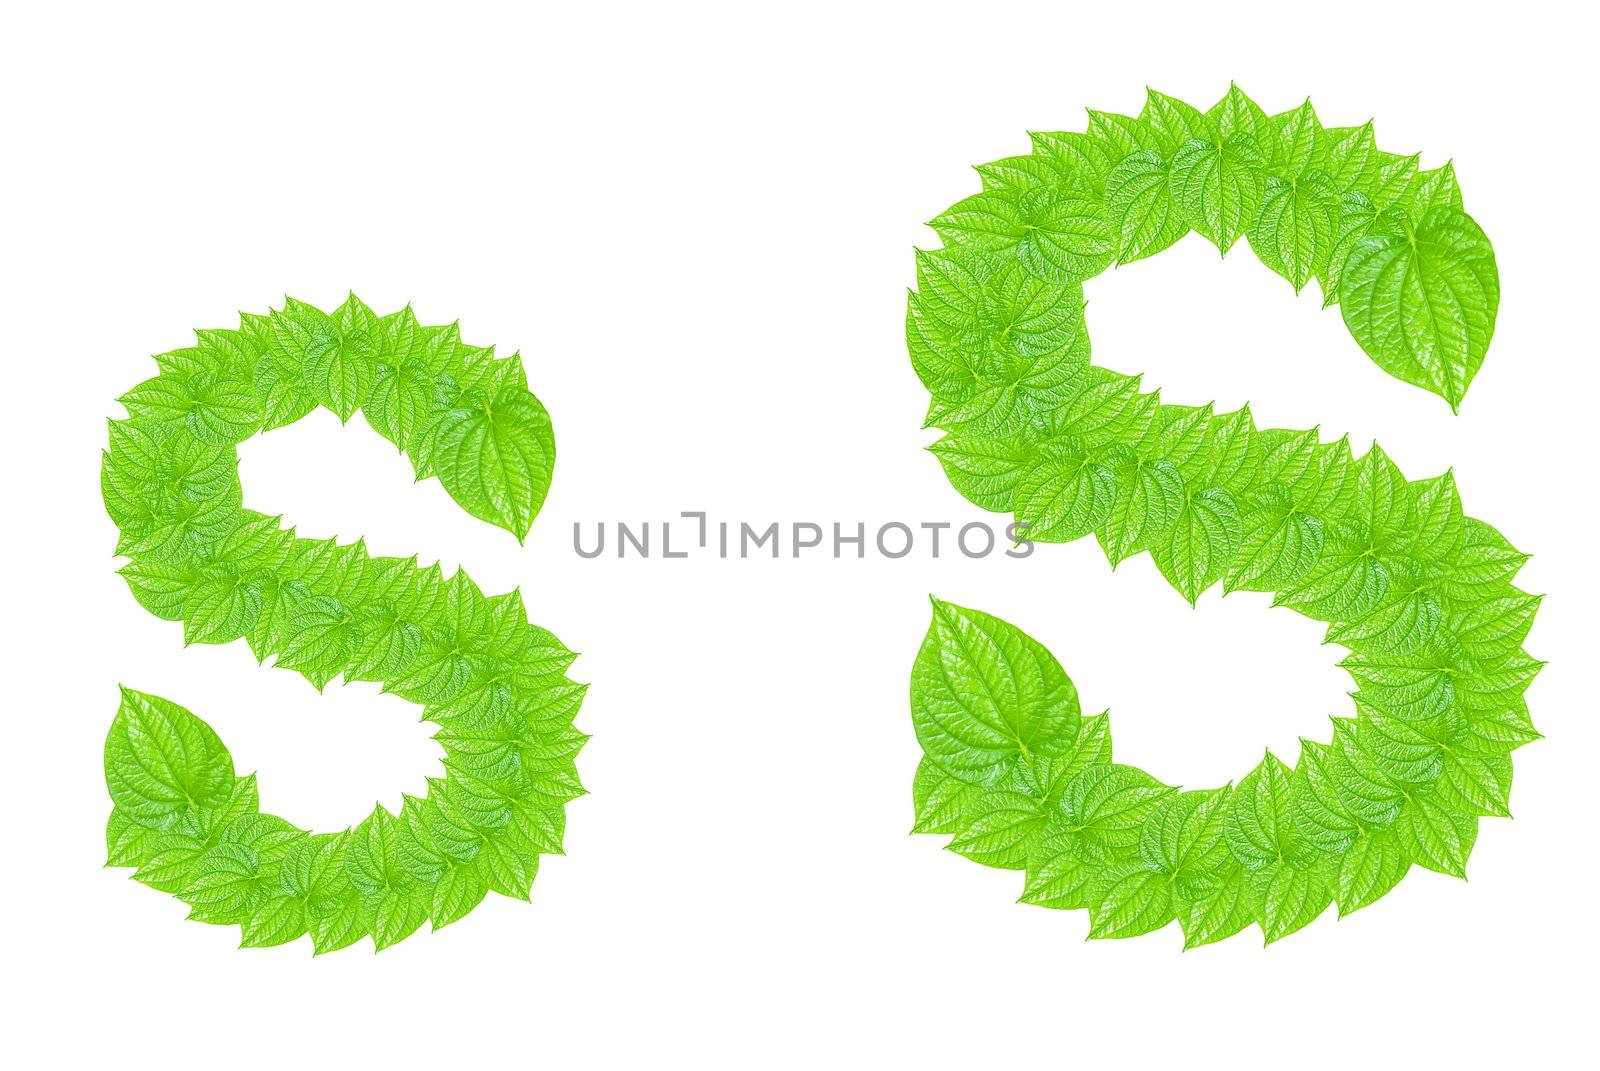 English alphabet made from green leafs with letter S in small capital and large capital letter